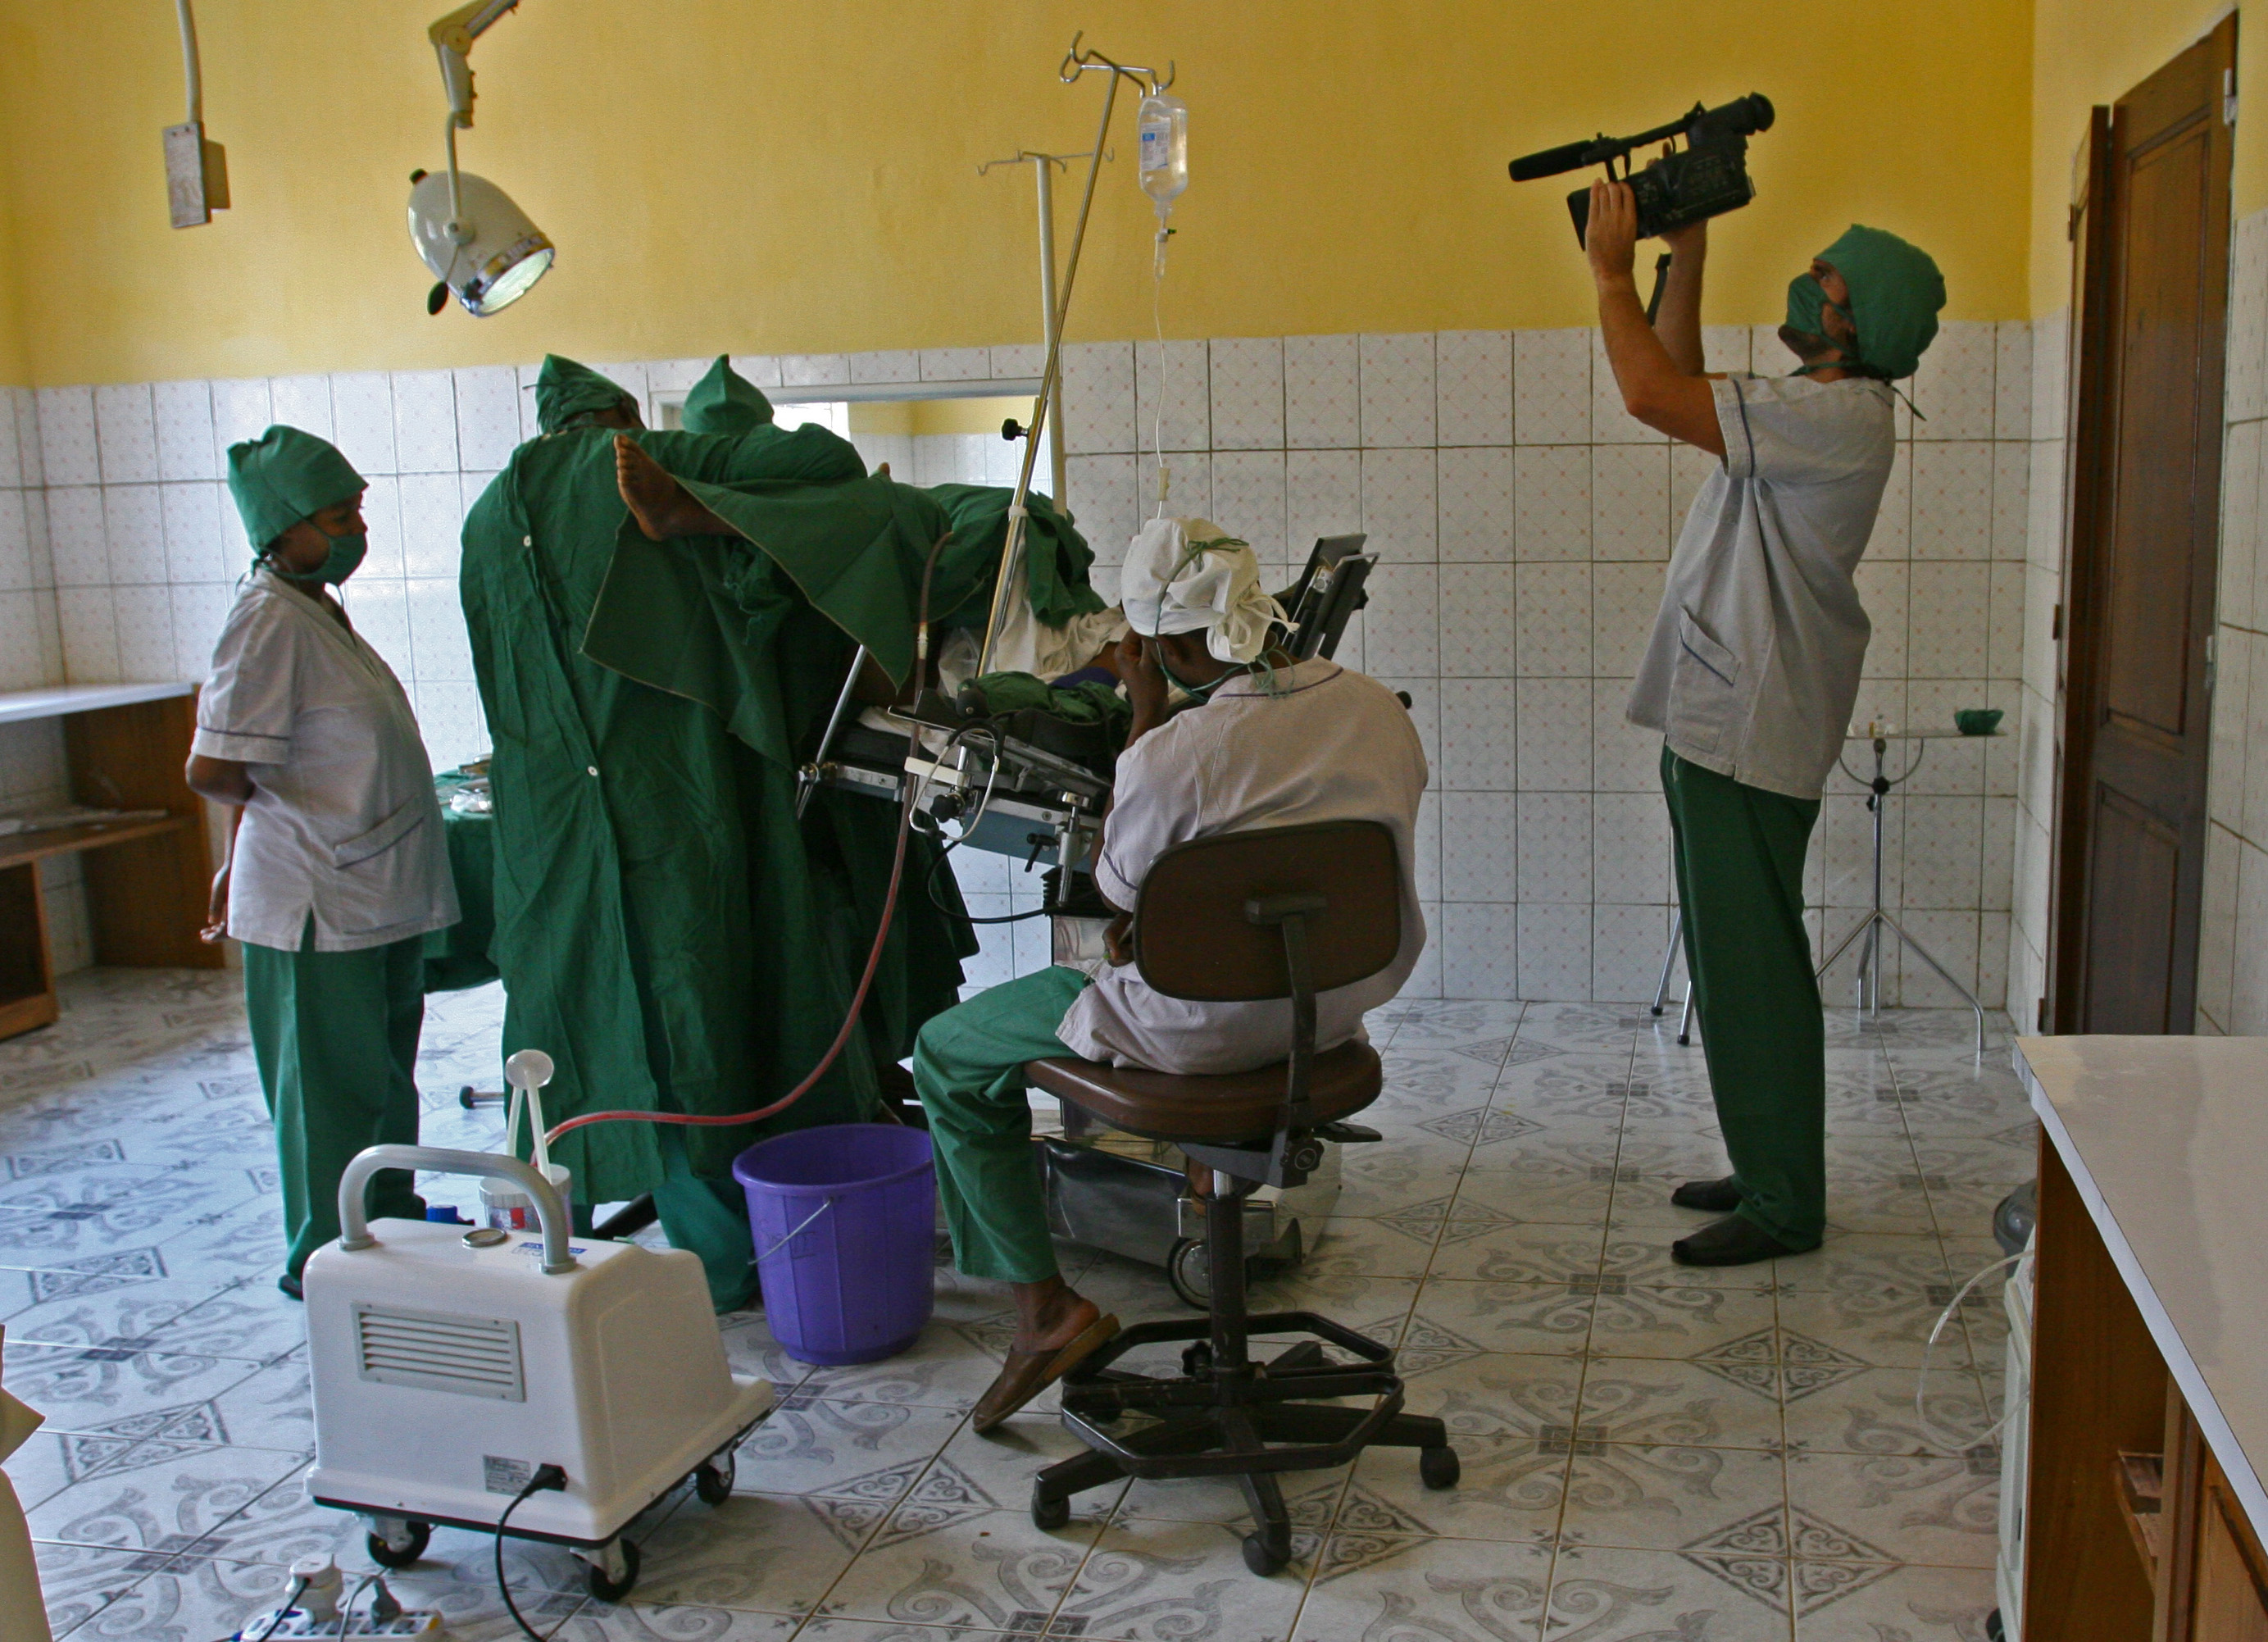 Filming the operation to women victims of rape in the Democratic Republic of Congo. For War Against Women documentary. (2008)